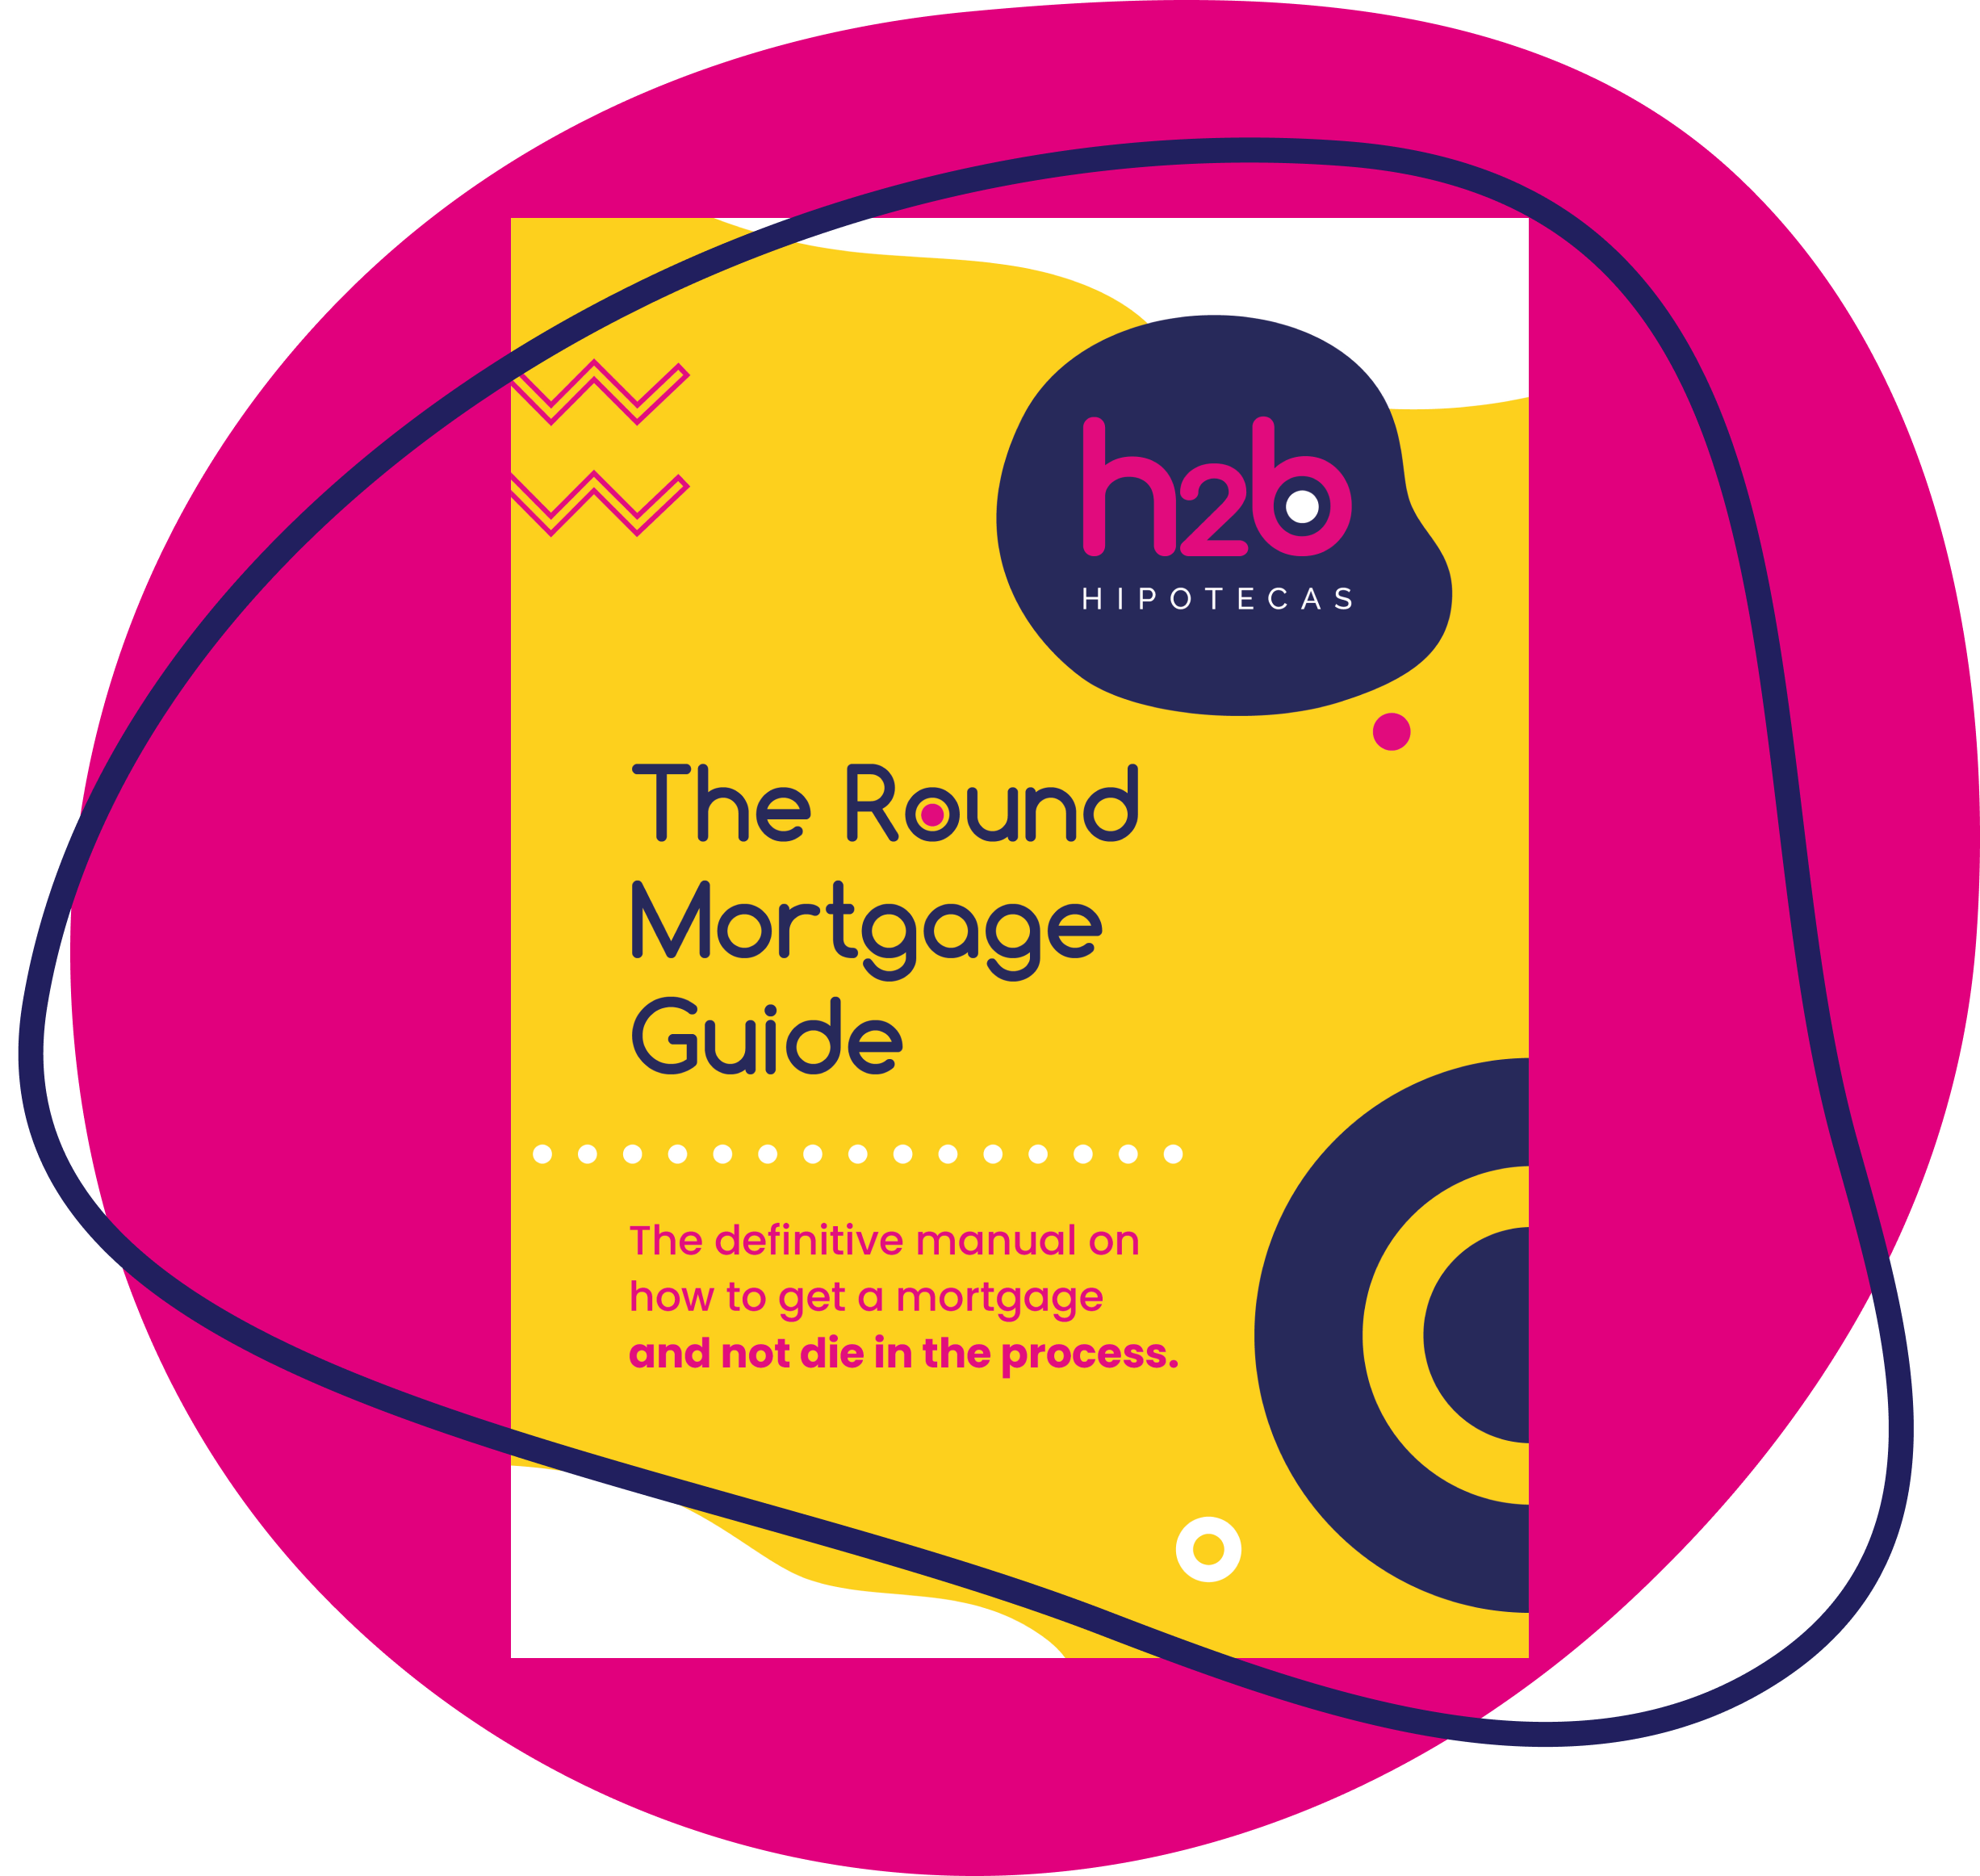 The round mortgage guide